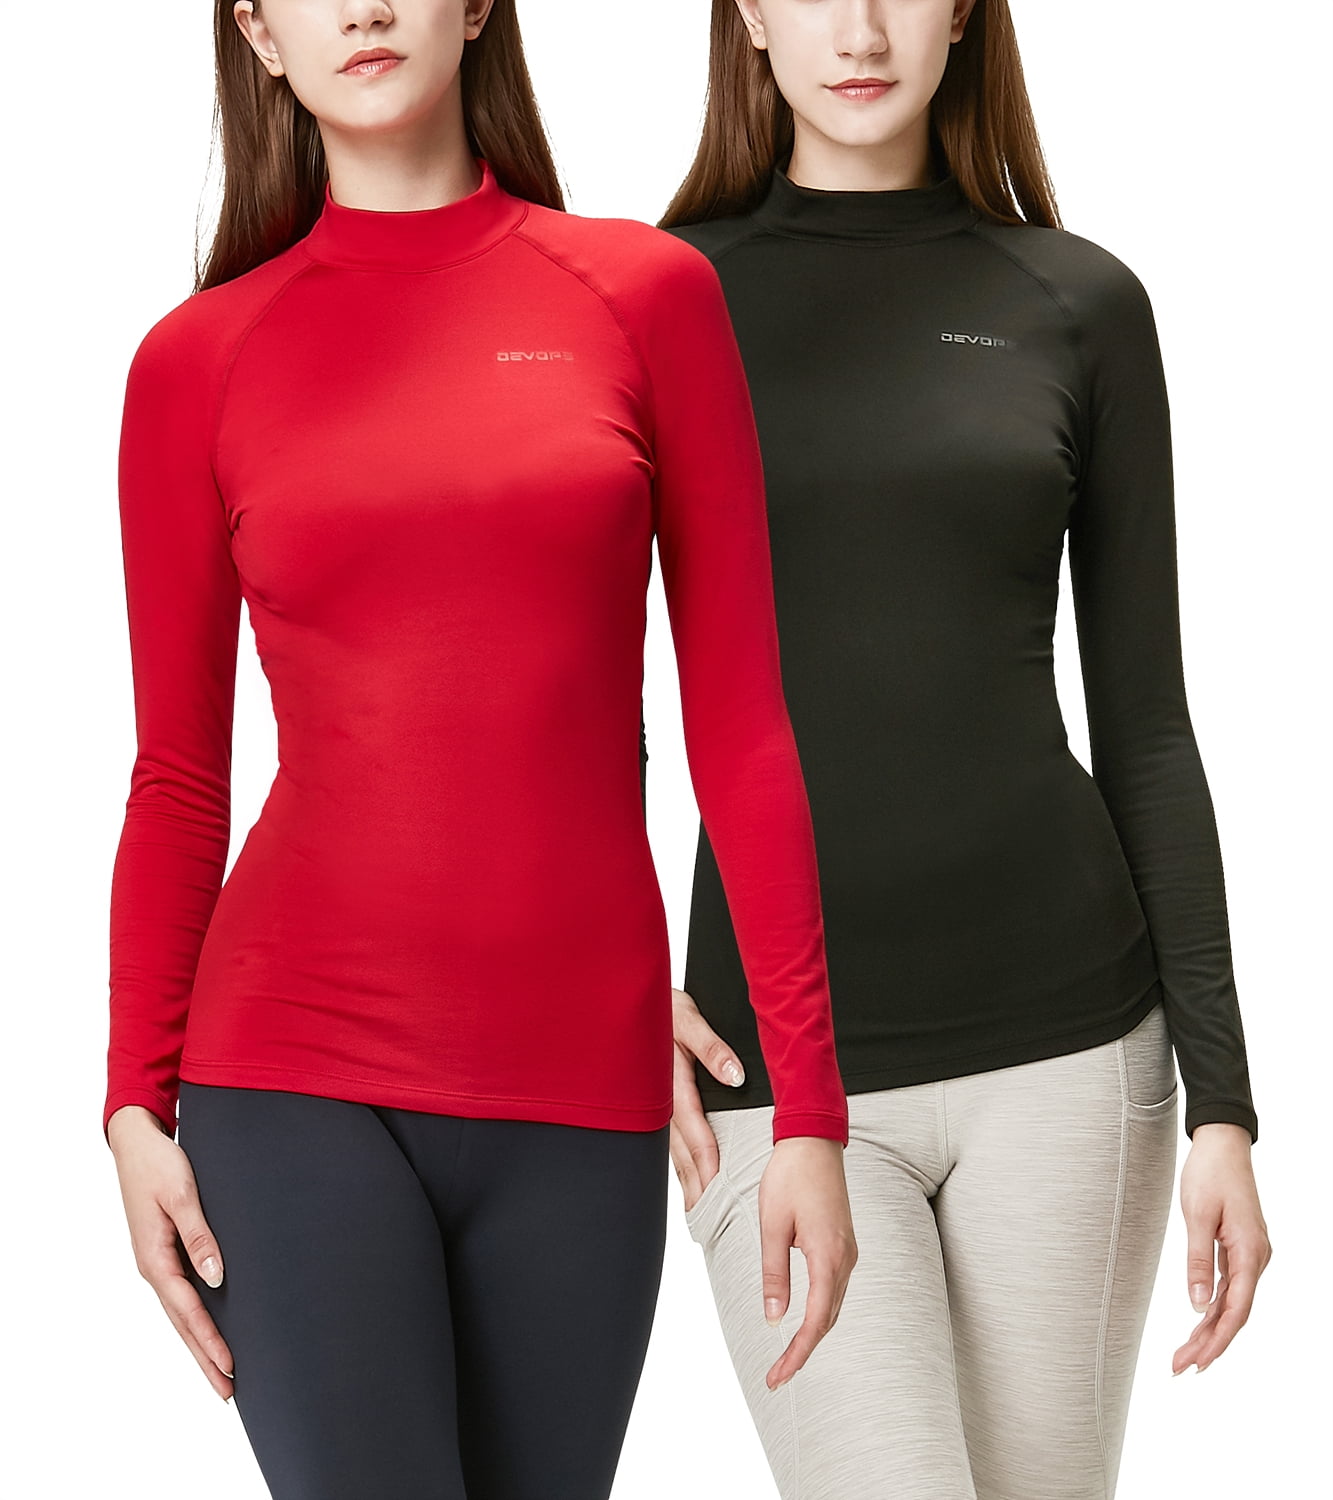 Thermajane Women's Compression Long Sleeve T-Shirt India